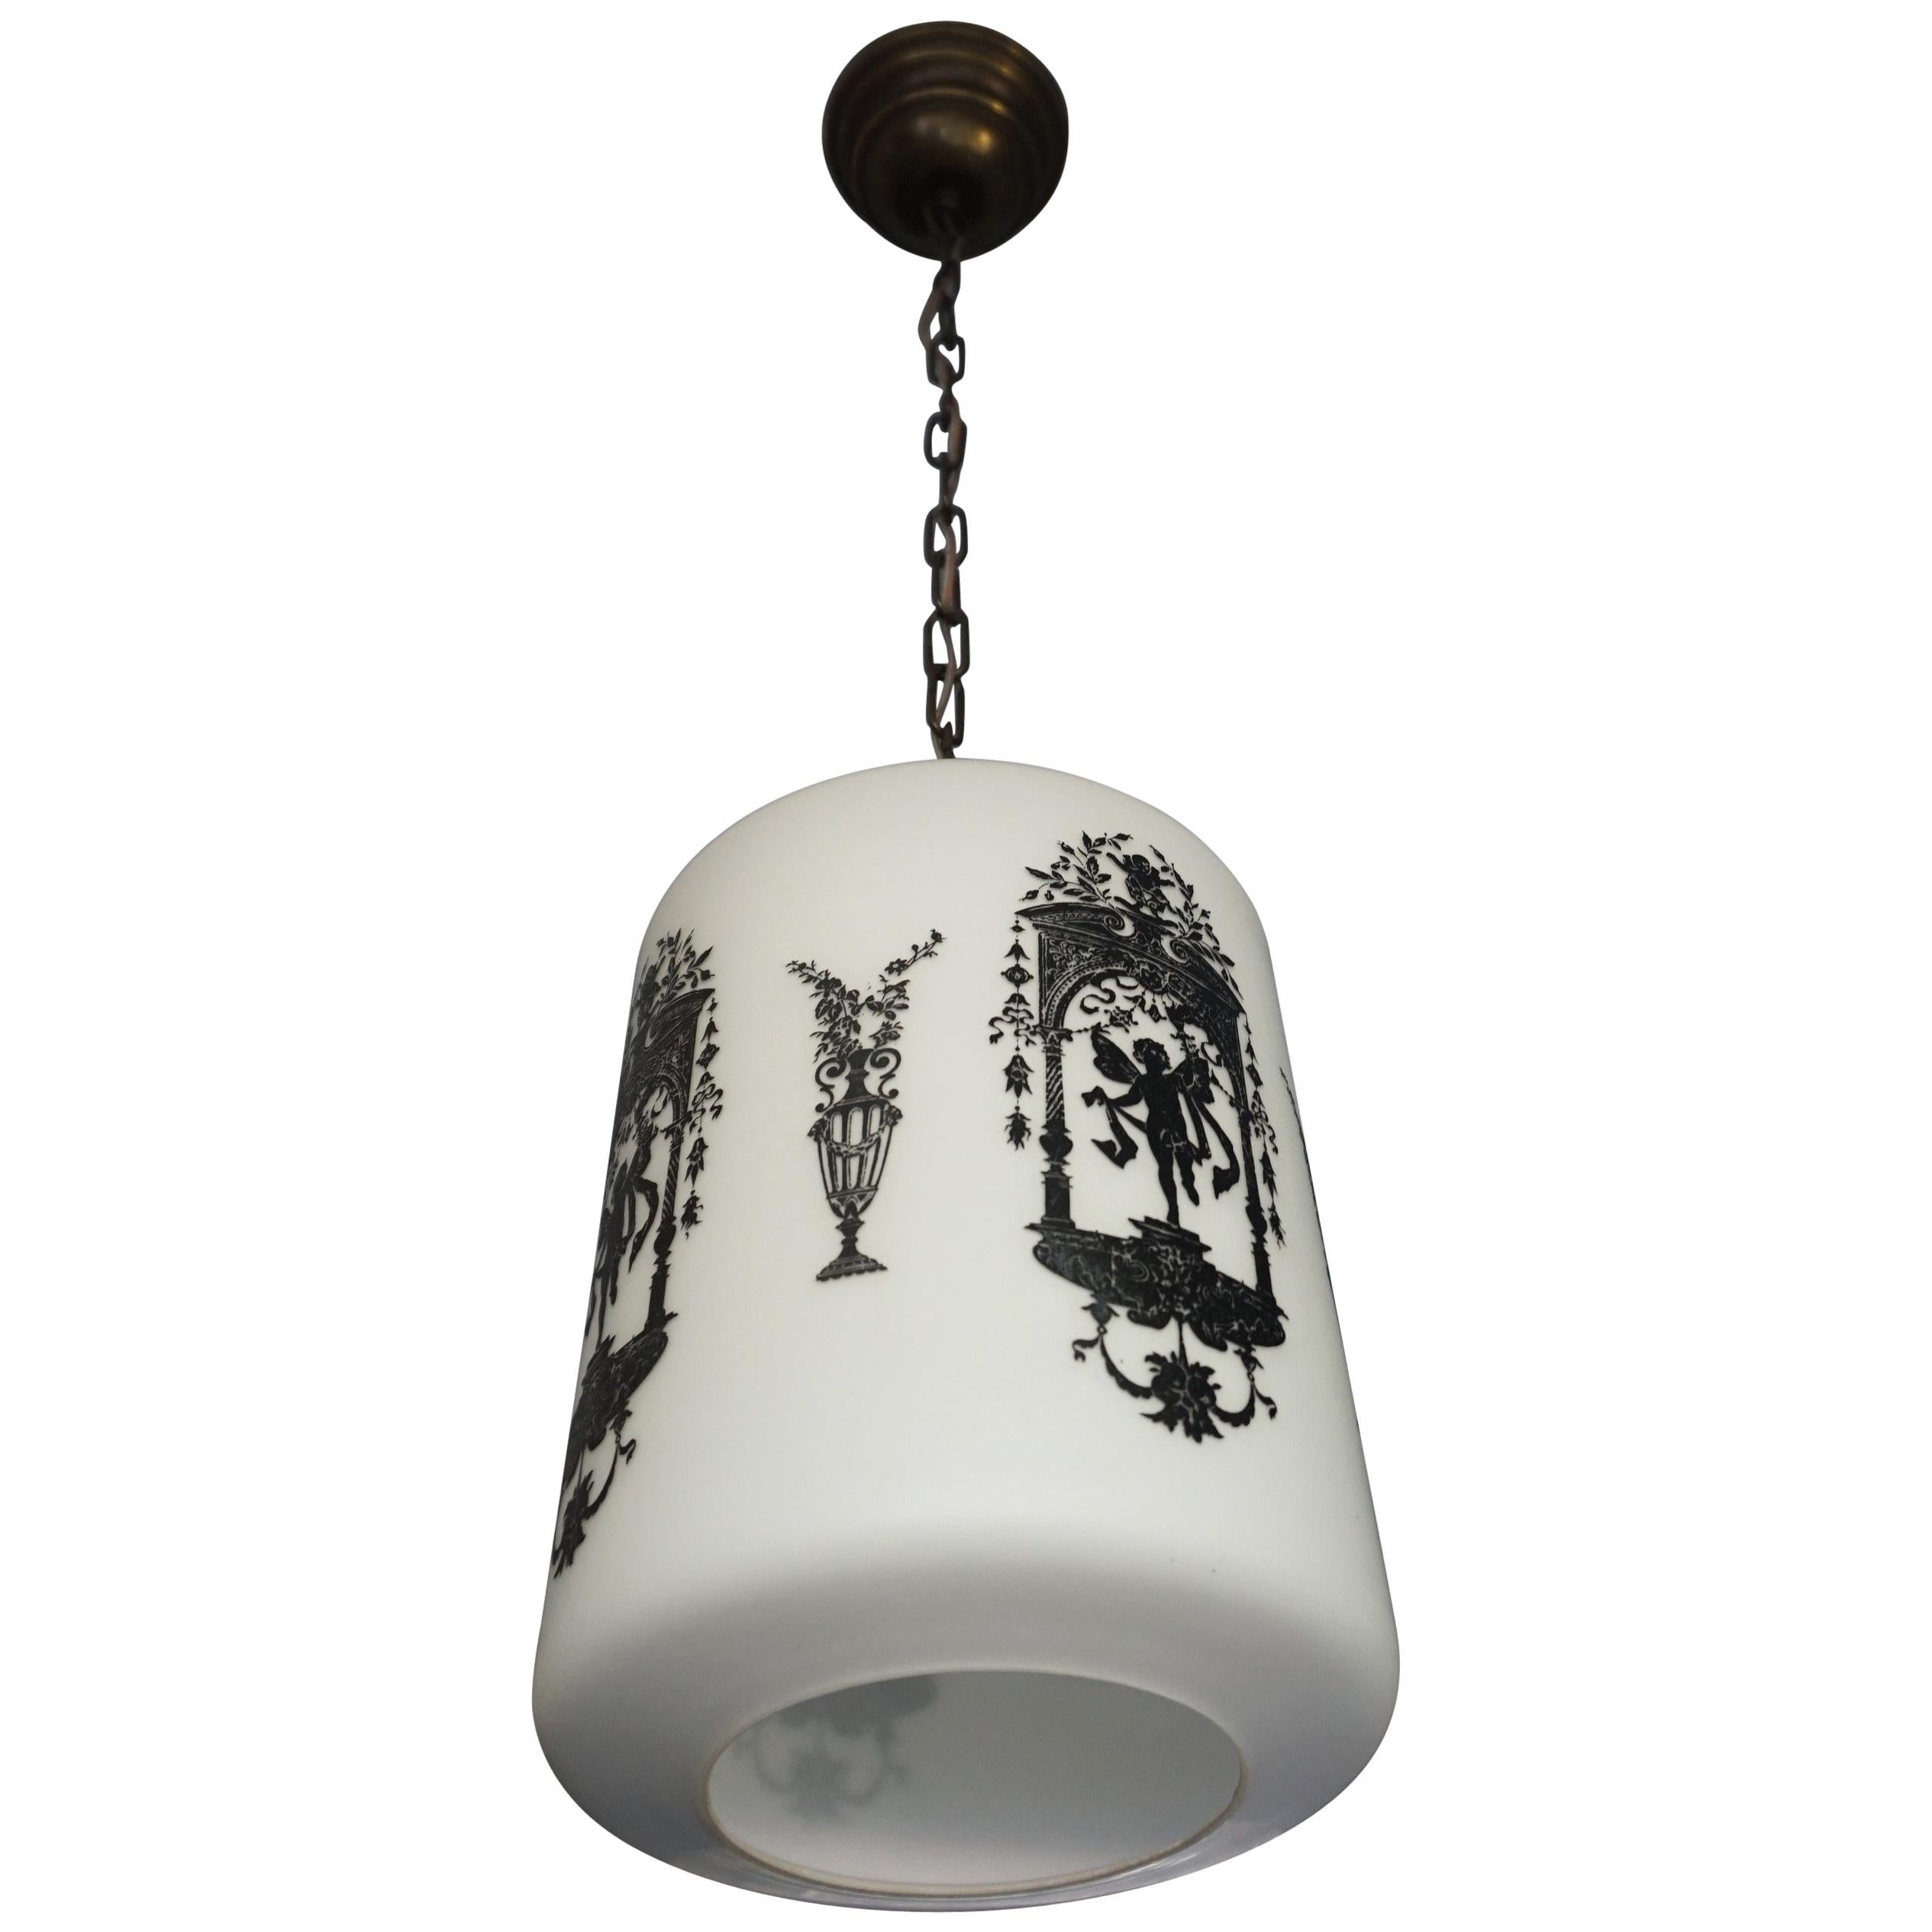 Early to Mid-20th Century Snowy White Glass Pendant with Black Renaissance Decor For Sale